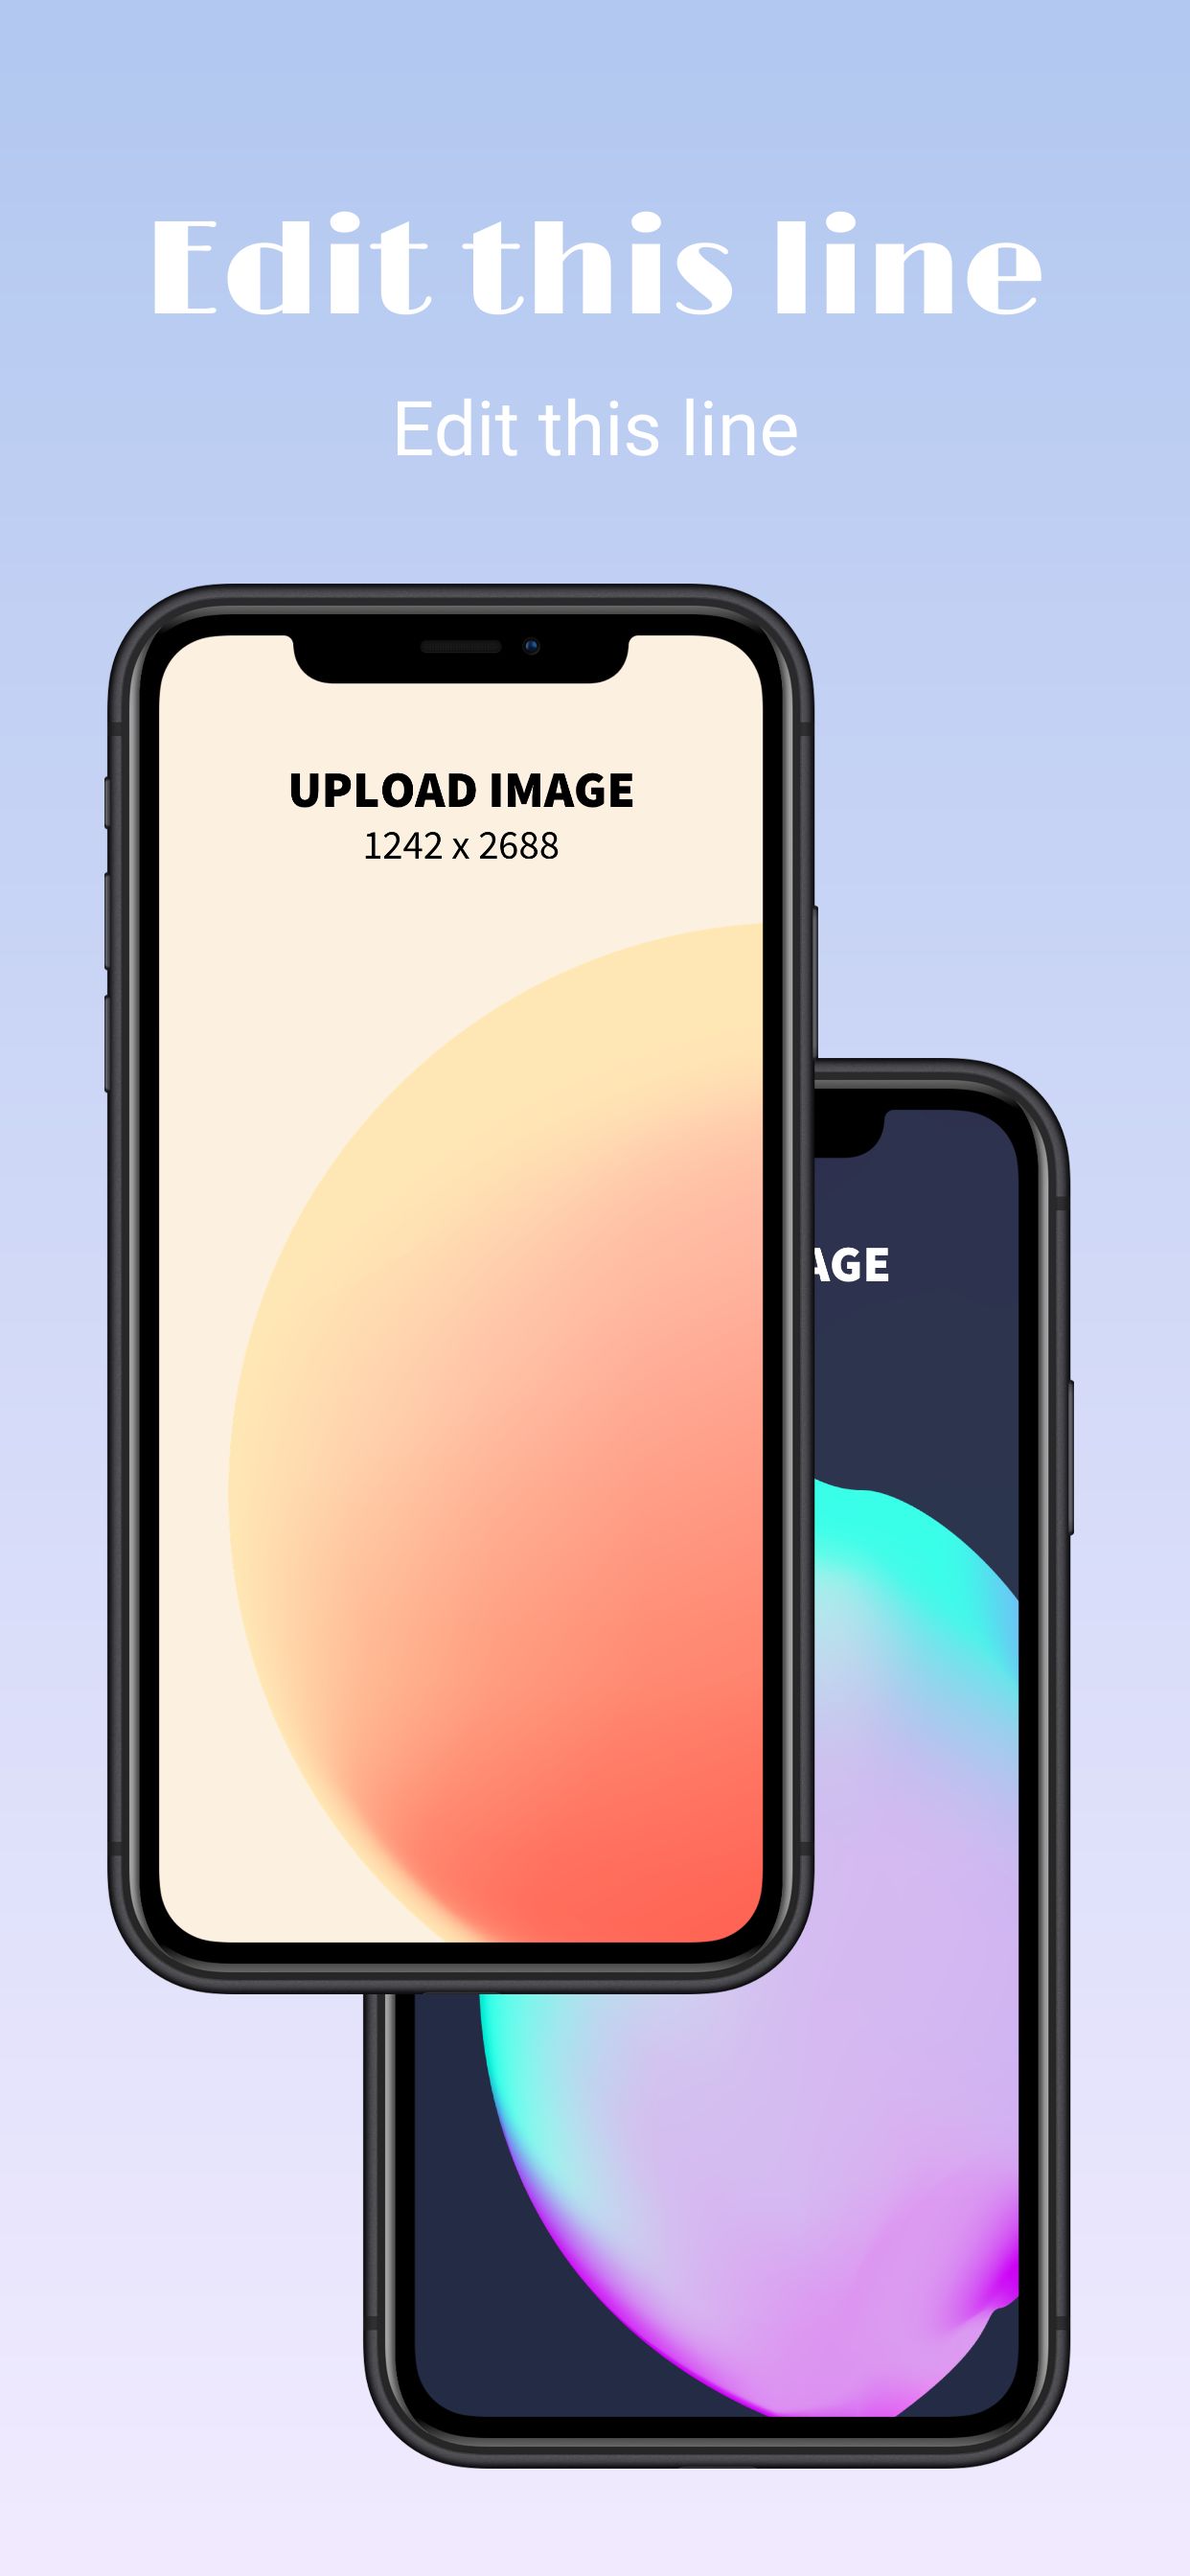 This is an App Store screenshot featuring two photorealistic iPhone XS Max frames and two lines of copy.